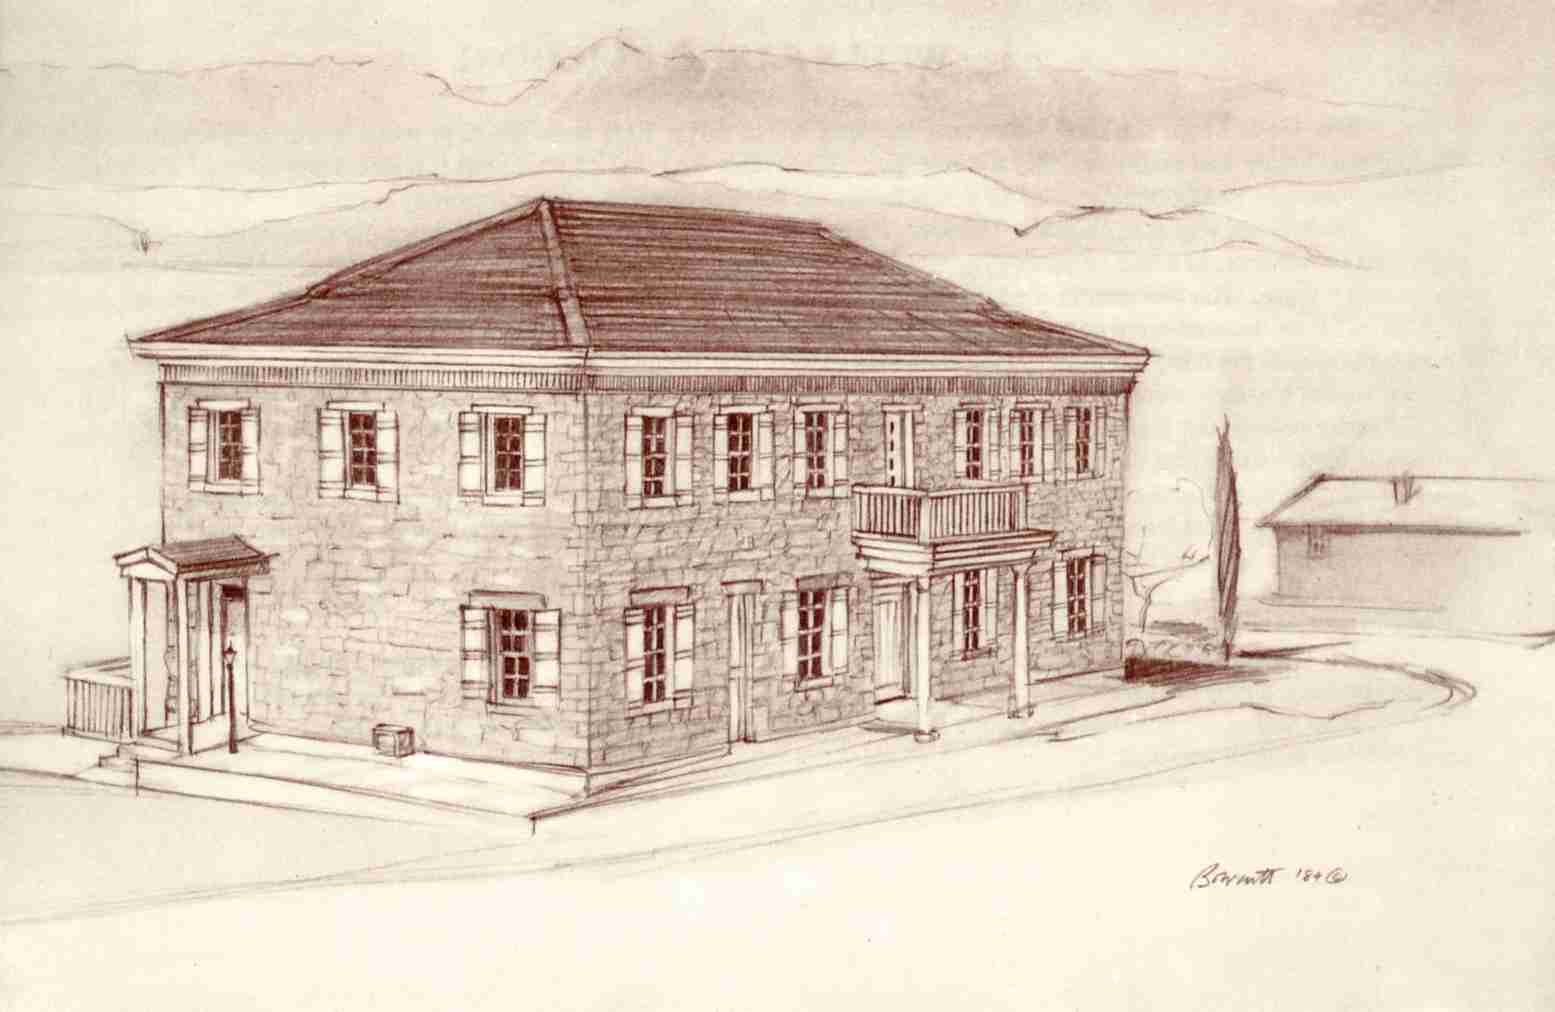 Sketch of the Naegle Home (Toquerville Winery)